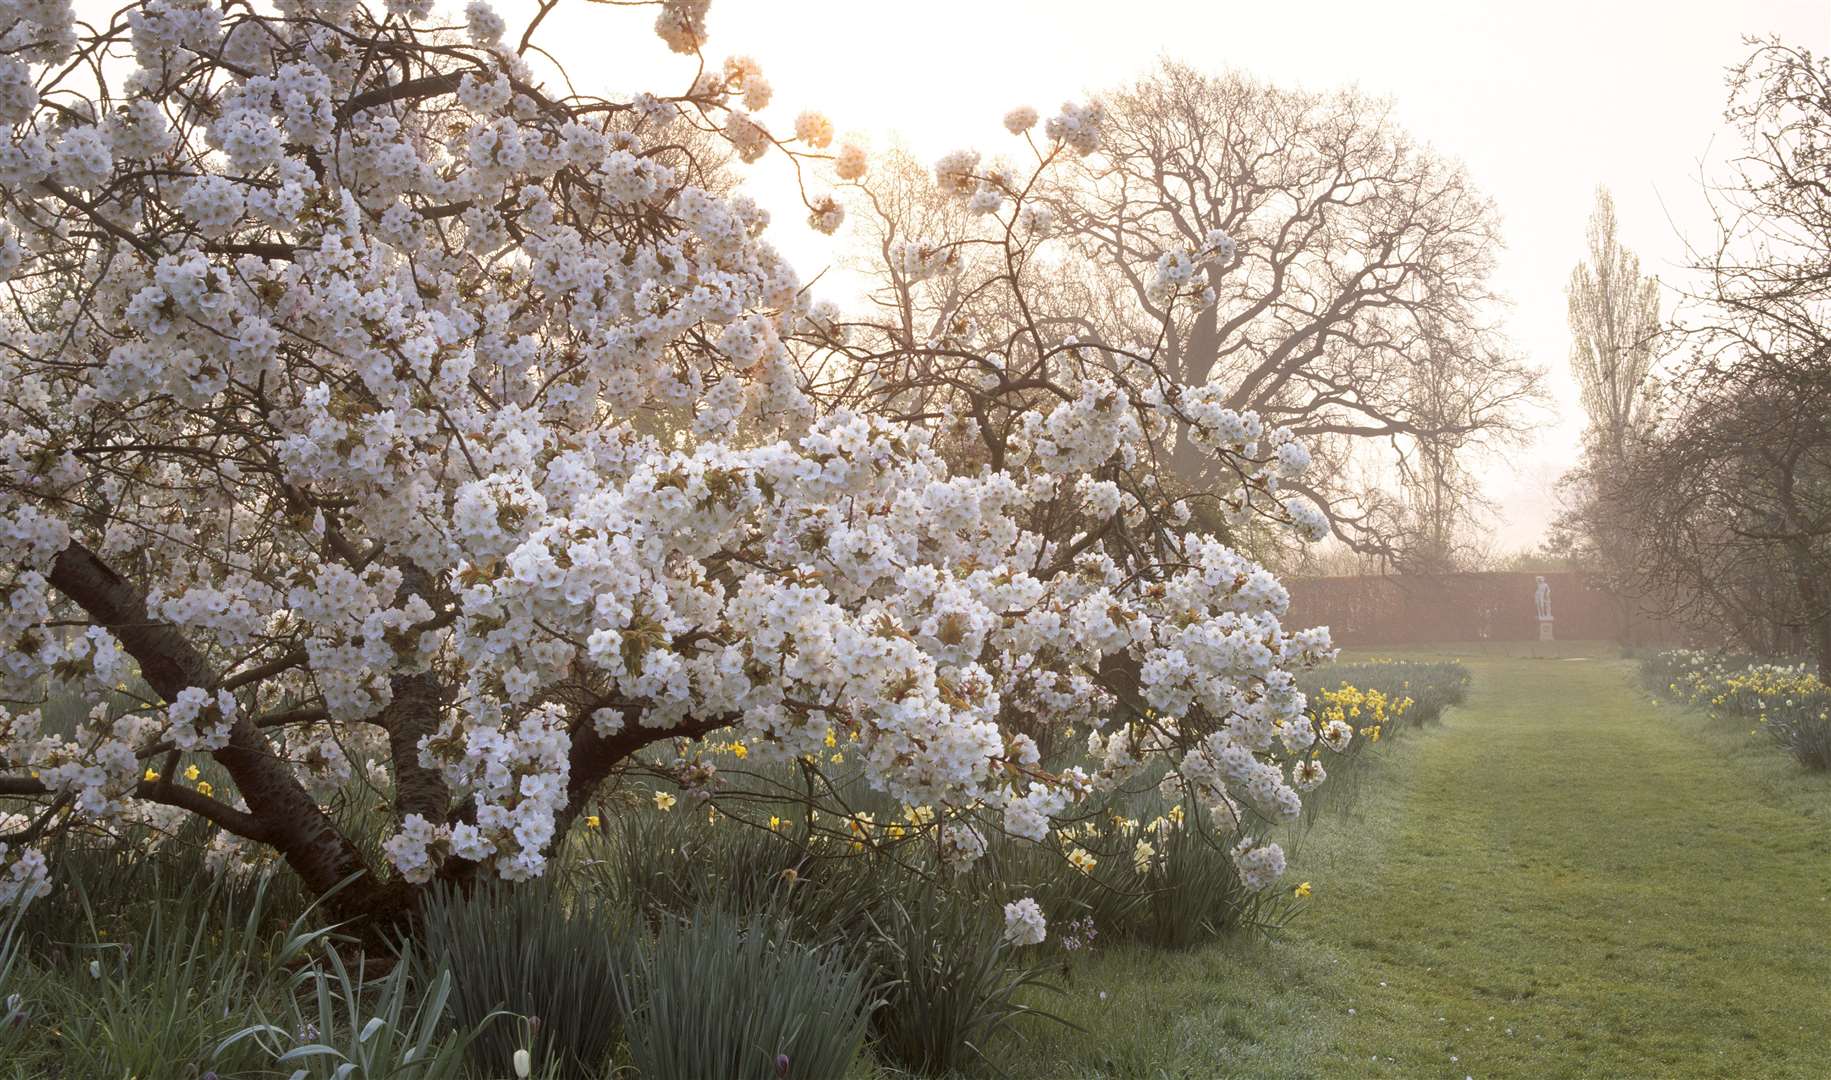 Visitors to Sissinghurst can expect to see apple trees in blossom with daffodils, narcissi and fritillaria. Picture: ©National Trust Images / David Sellman